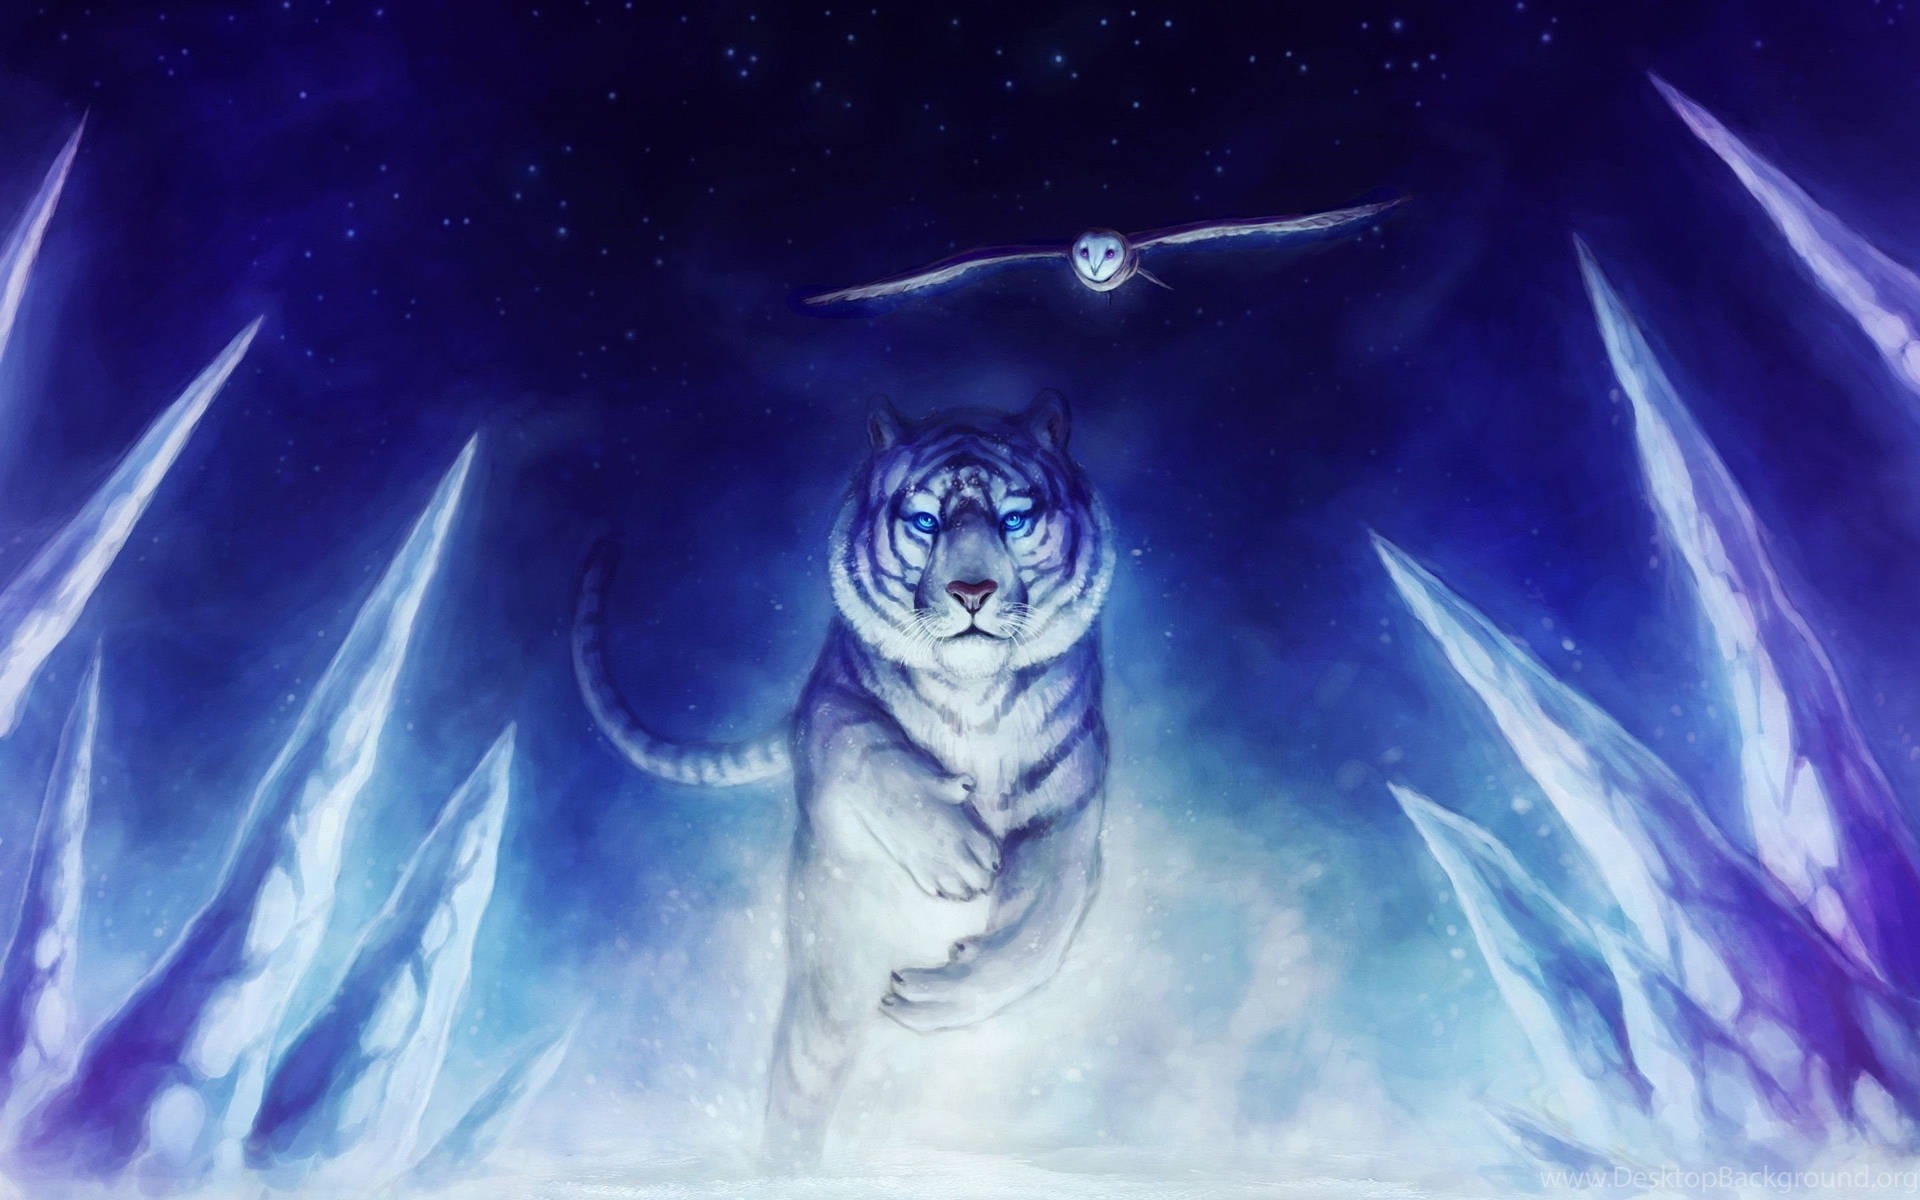 Cool Dreamy Photo Of Tiger And Owl Background